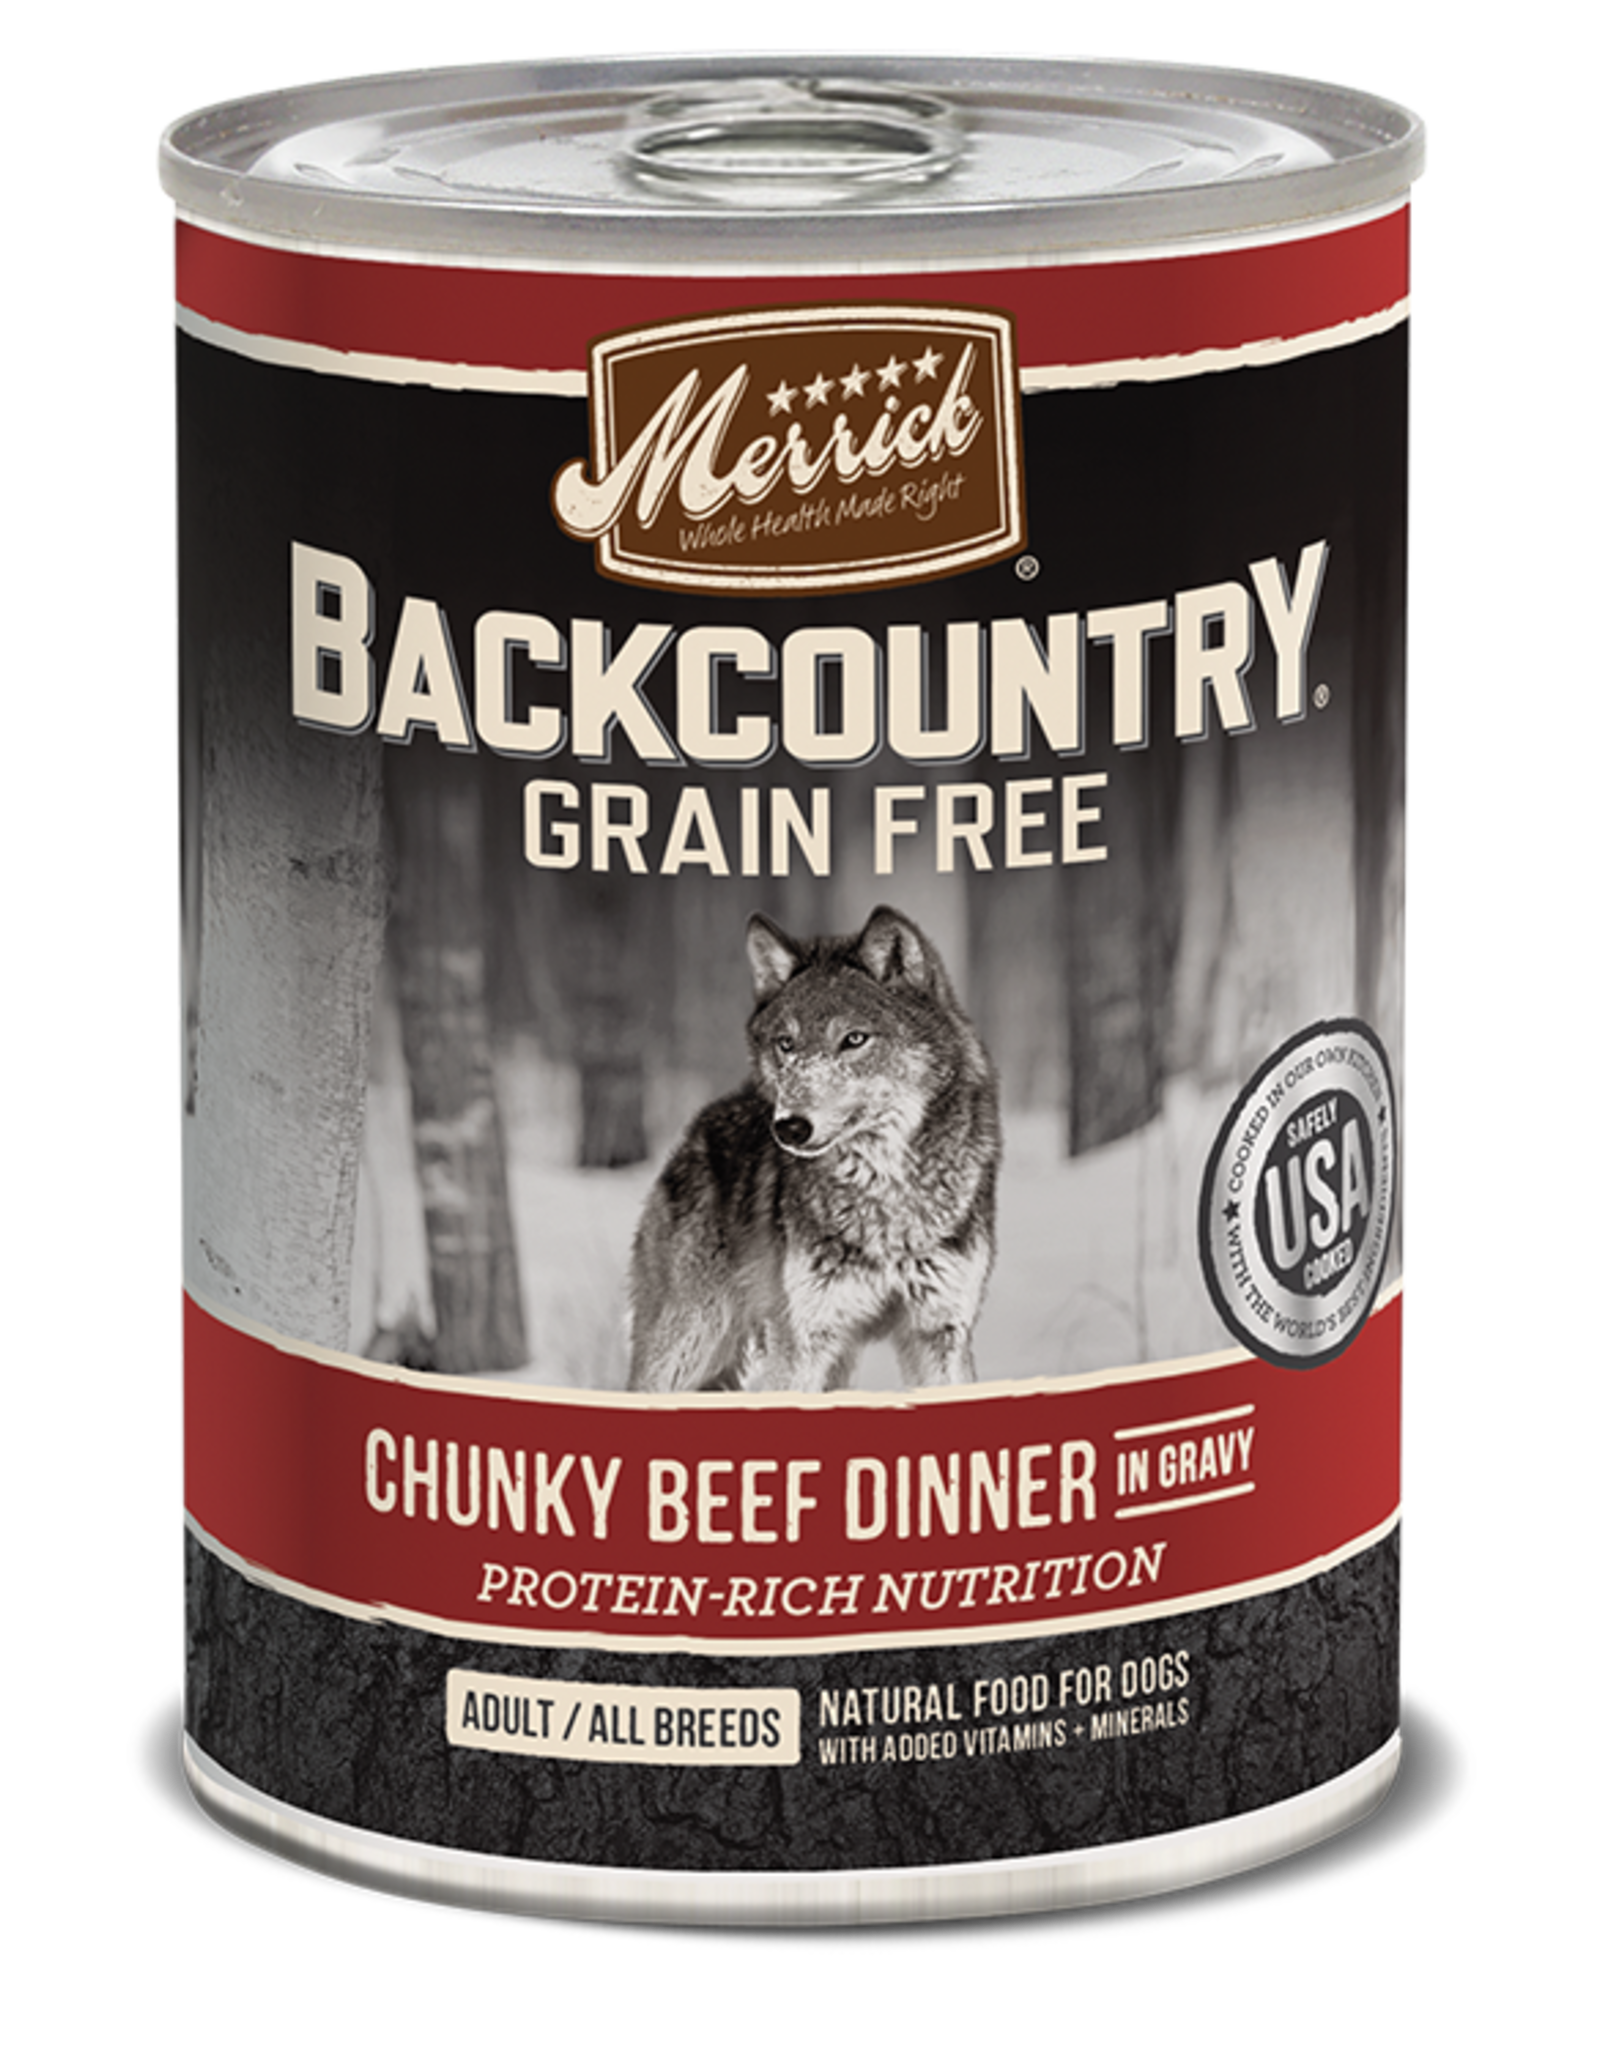 MERRICK PET CARE, INC. MERRICK BACKCOUNTRY DOG CHUNKY BEEF CAN 12.7OZ CASE OF 12